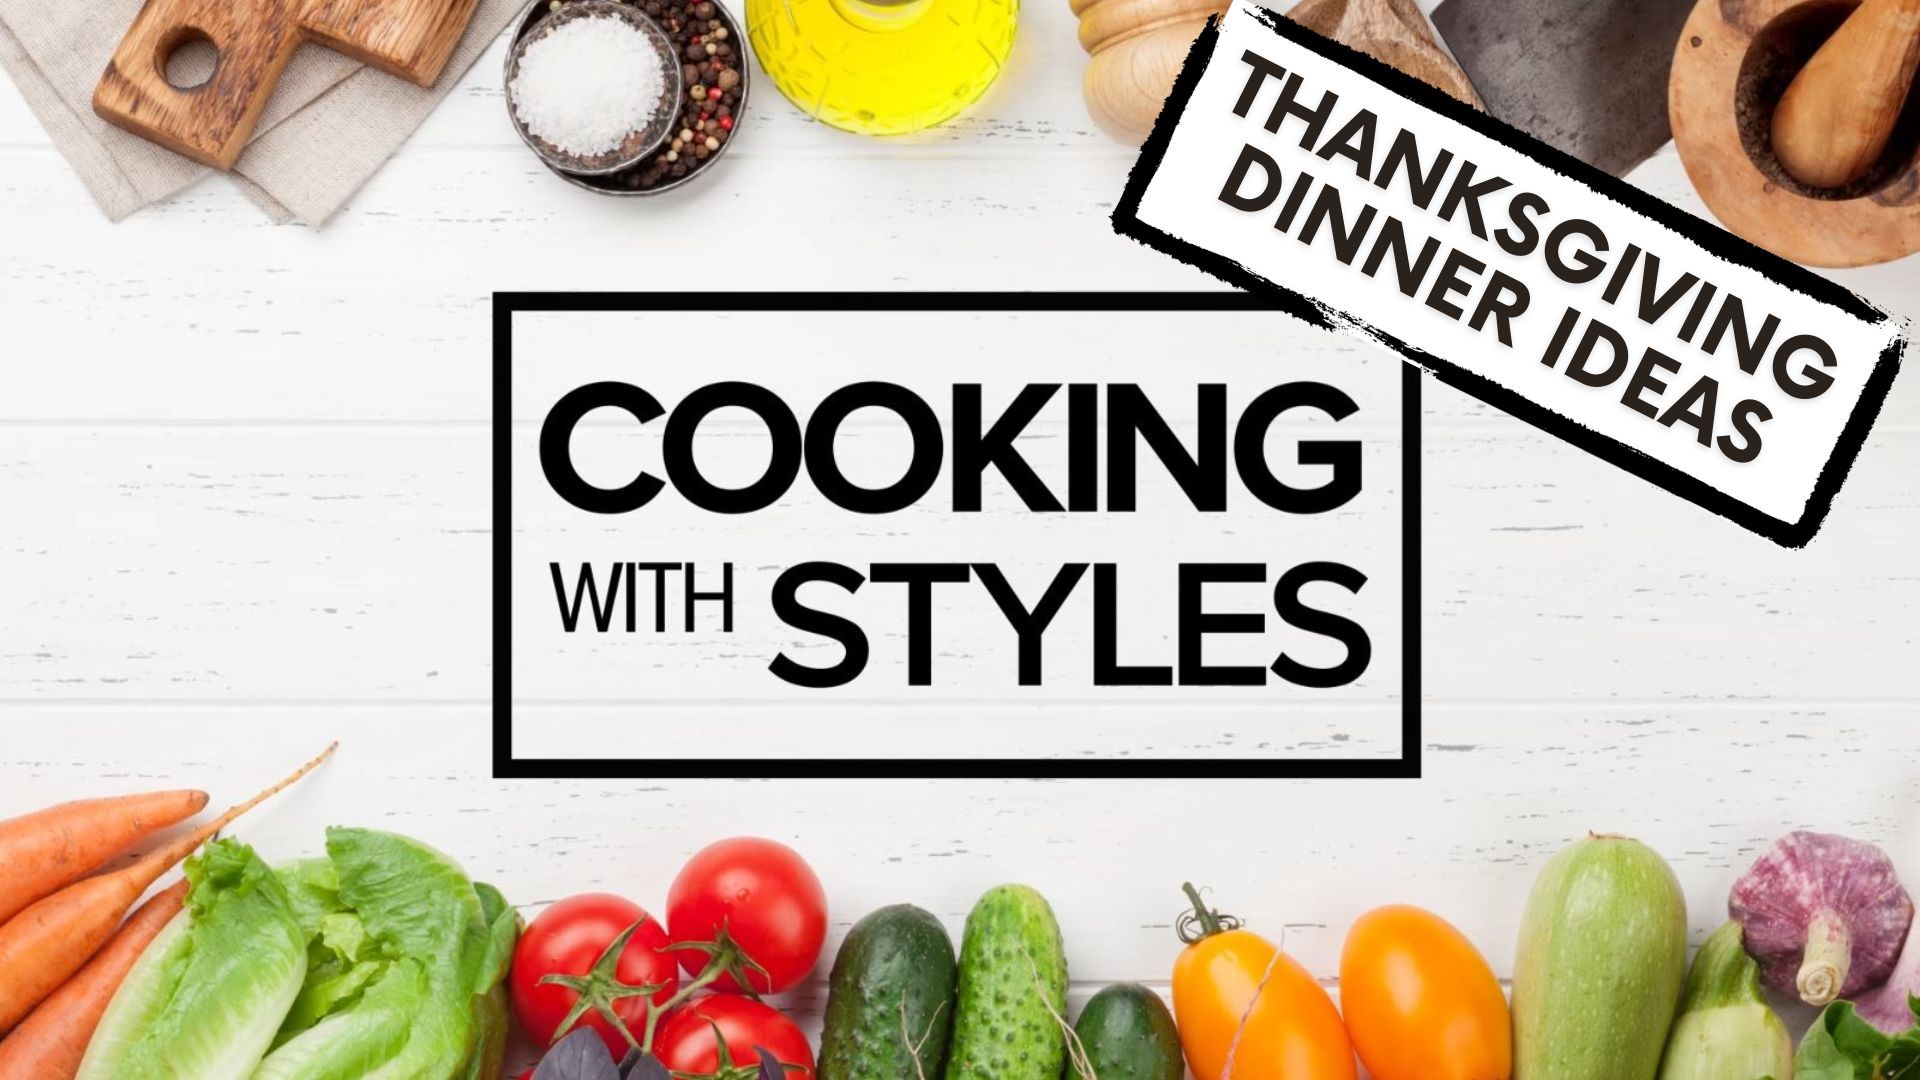 Shawn Styles shares some of his favorite dishes to help elevate your Thanksgiving dinner. From sides to how to use your leftovers, there is something for everyone.